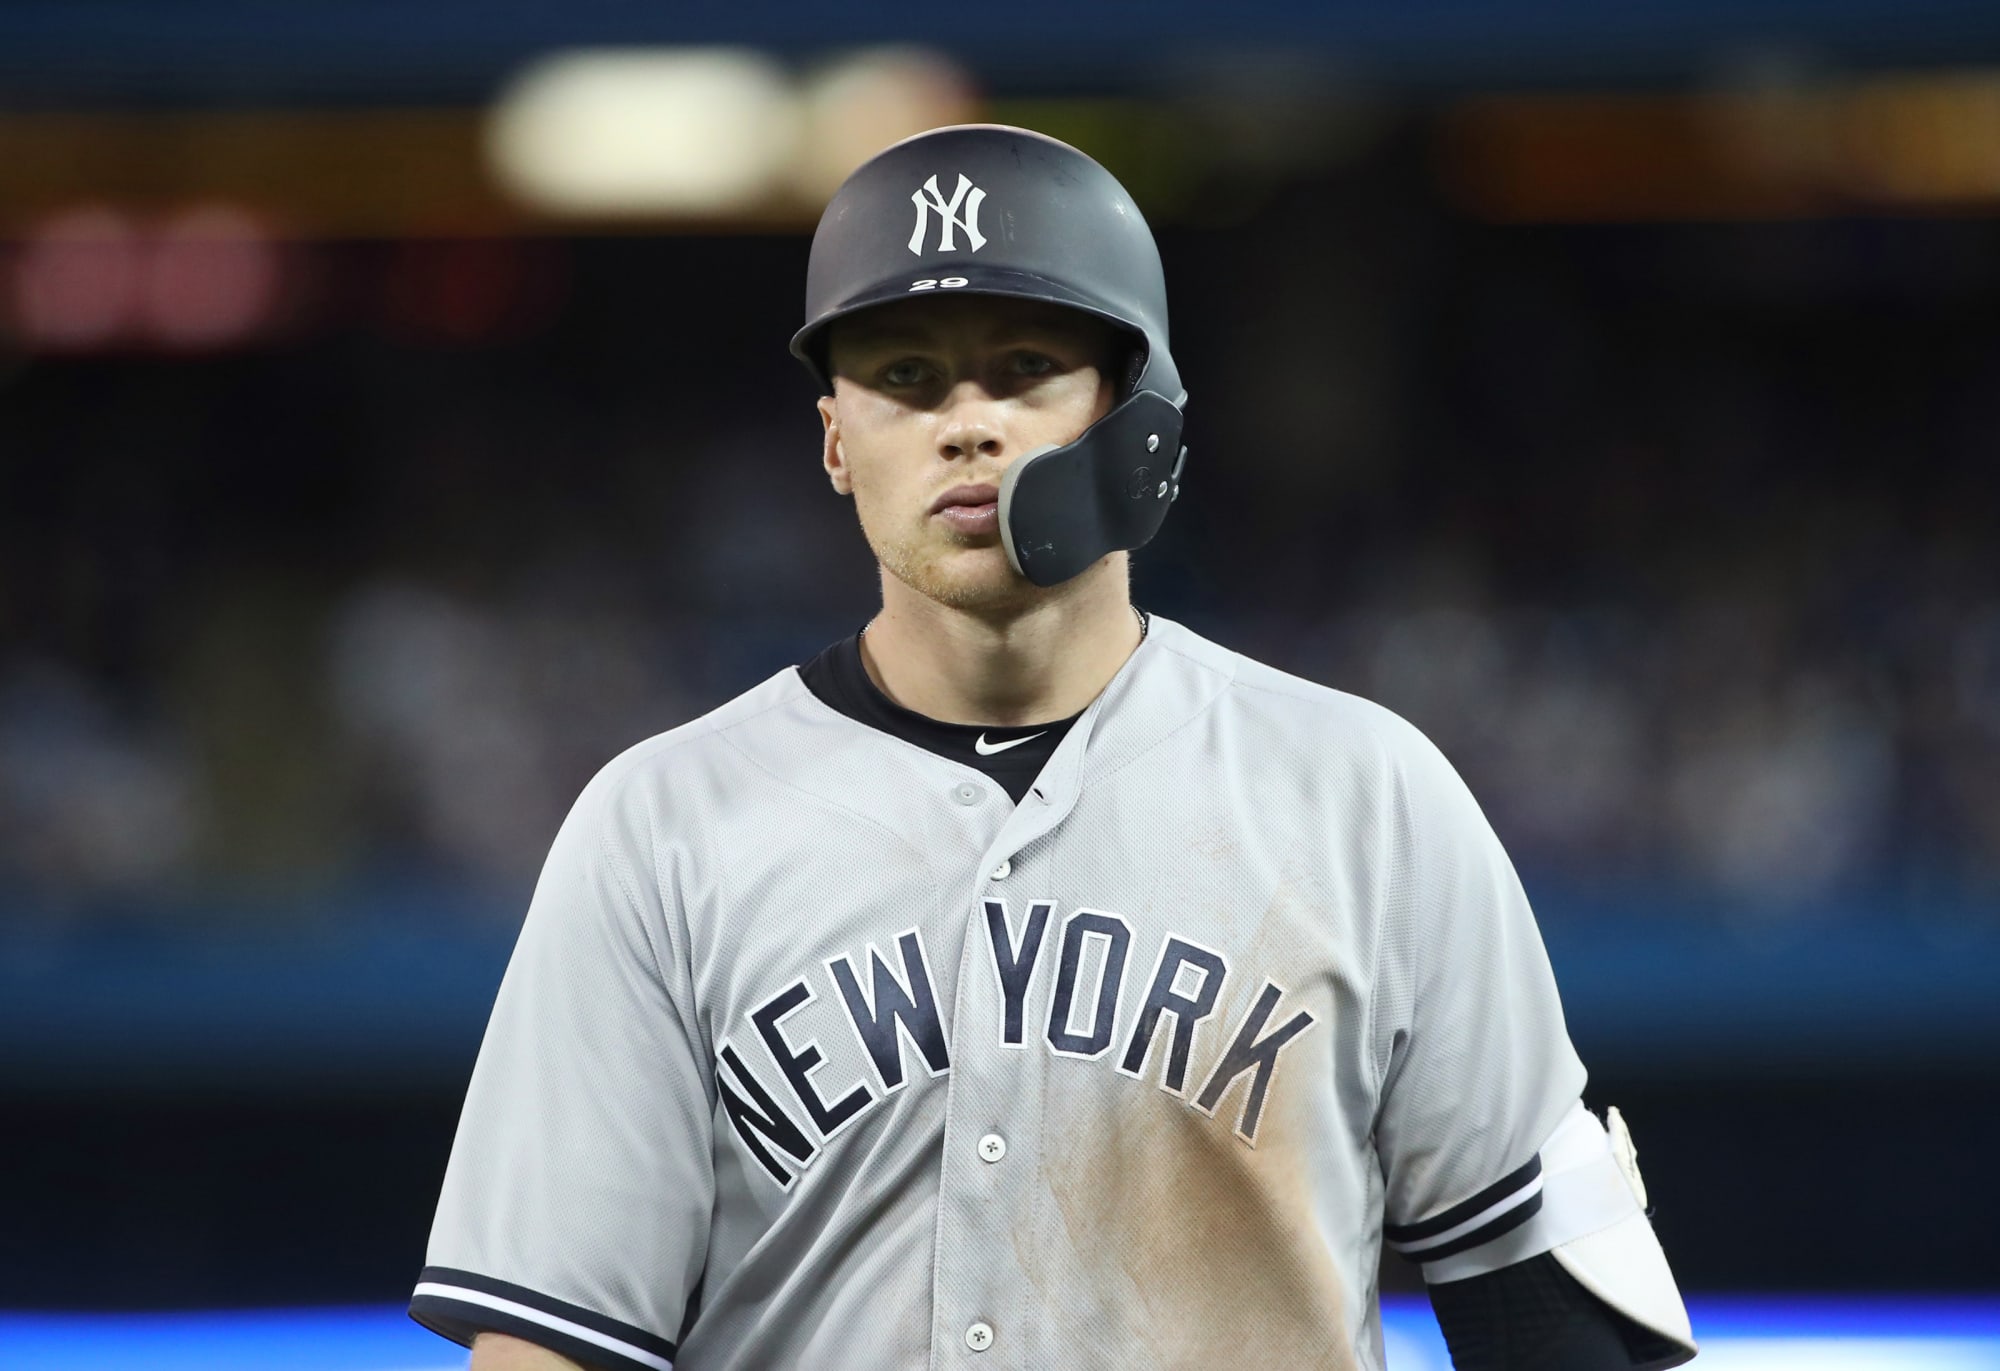 Yankees Revisiting the Very Bad Brandon Drury Trade With Rays and DBacks